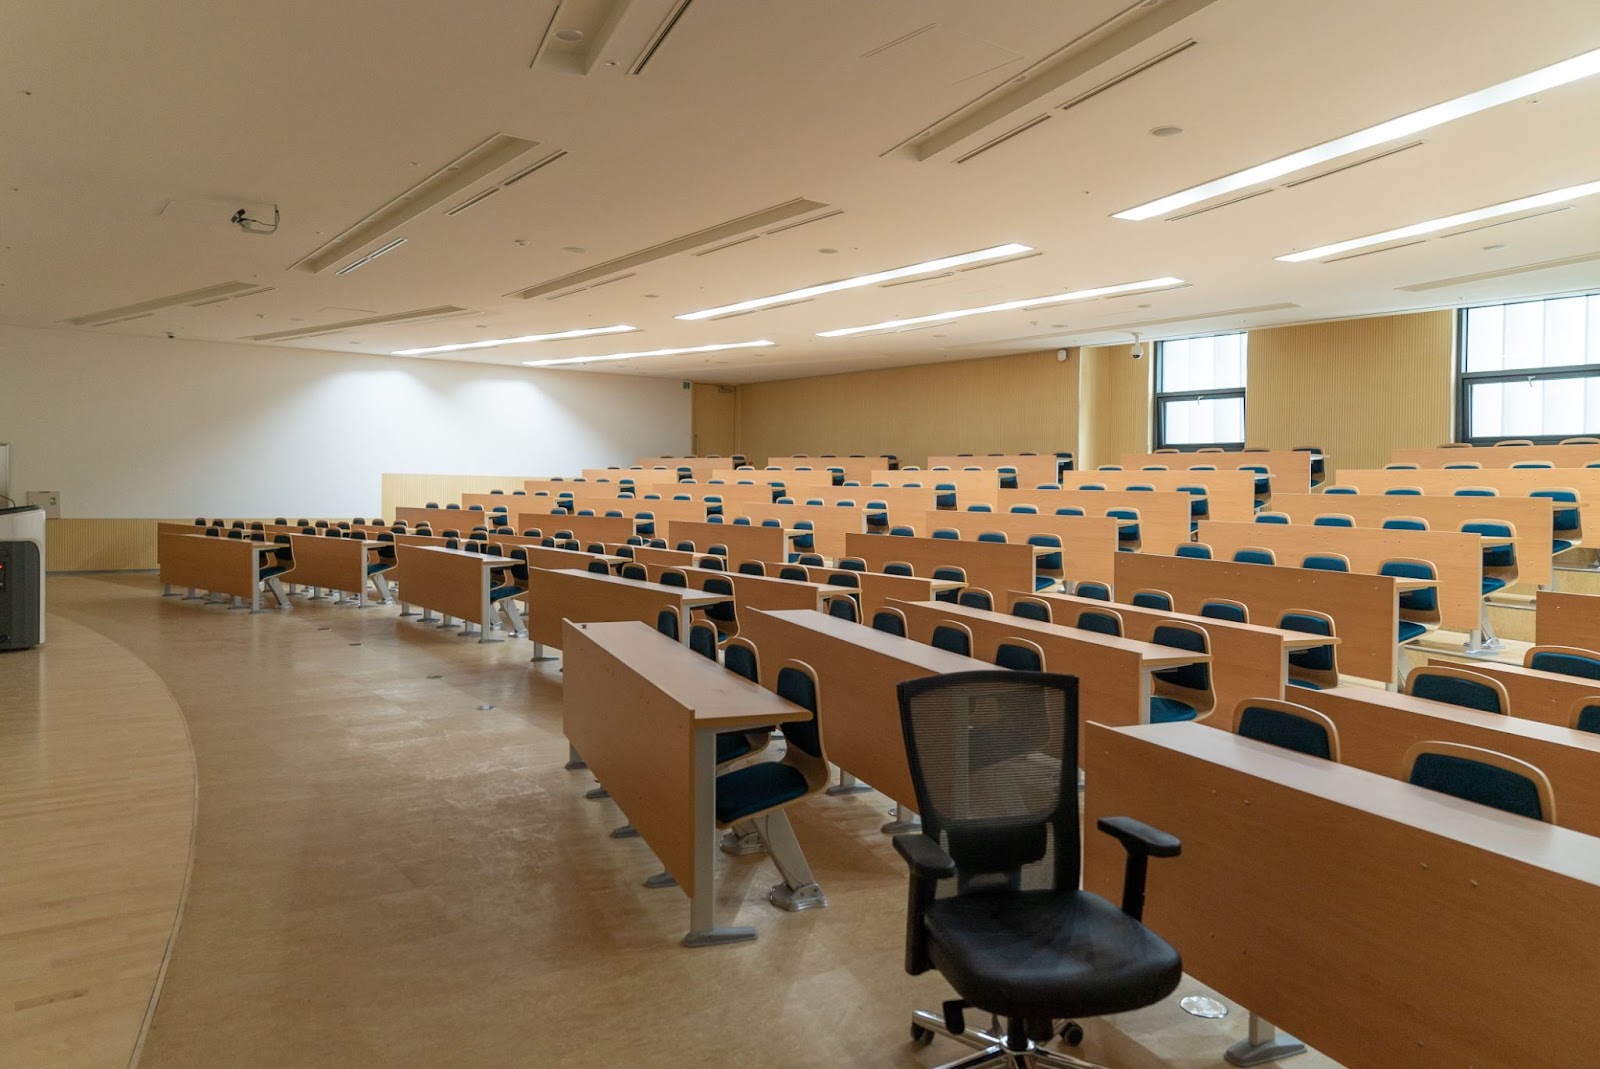 A picture of an empty university classroom.